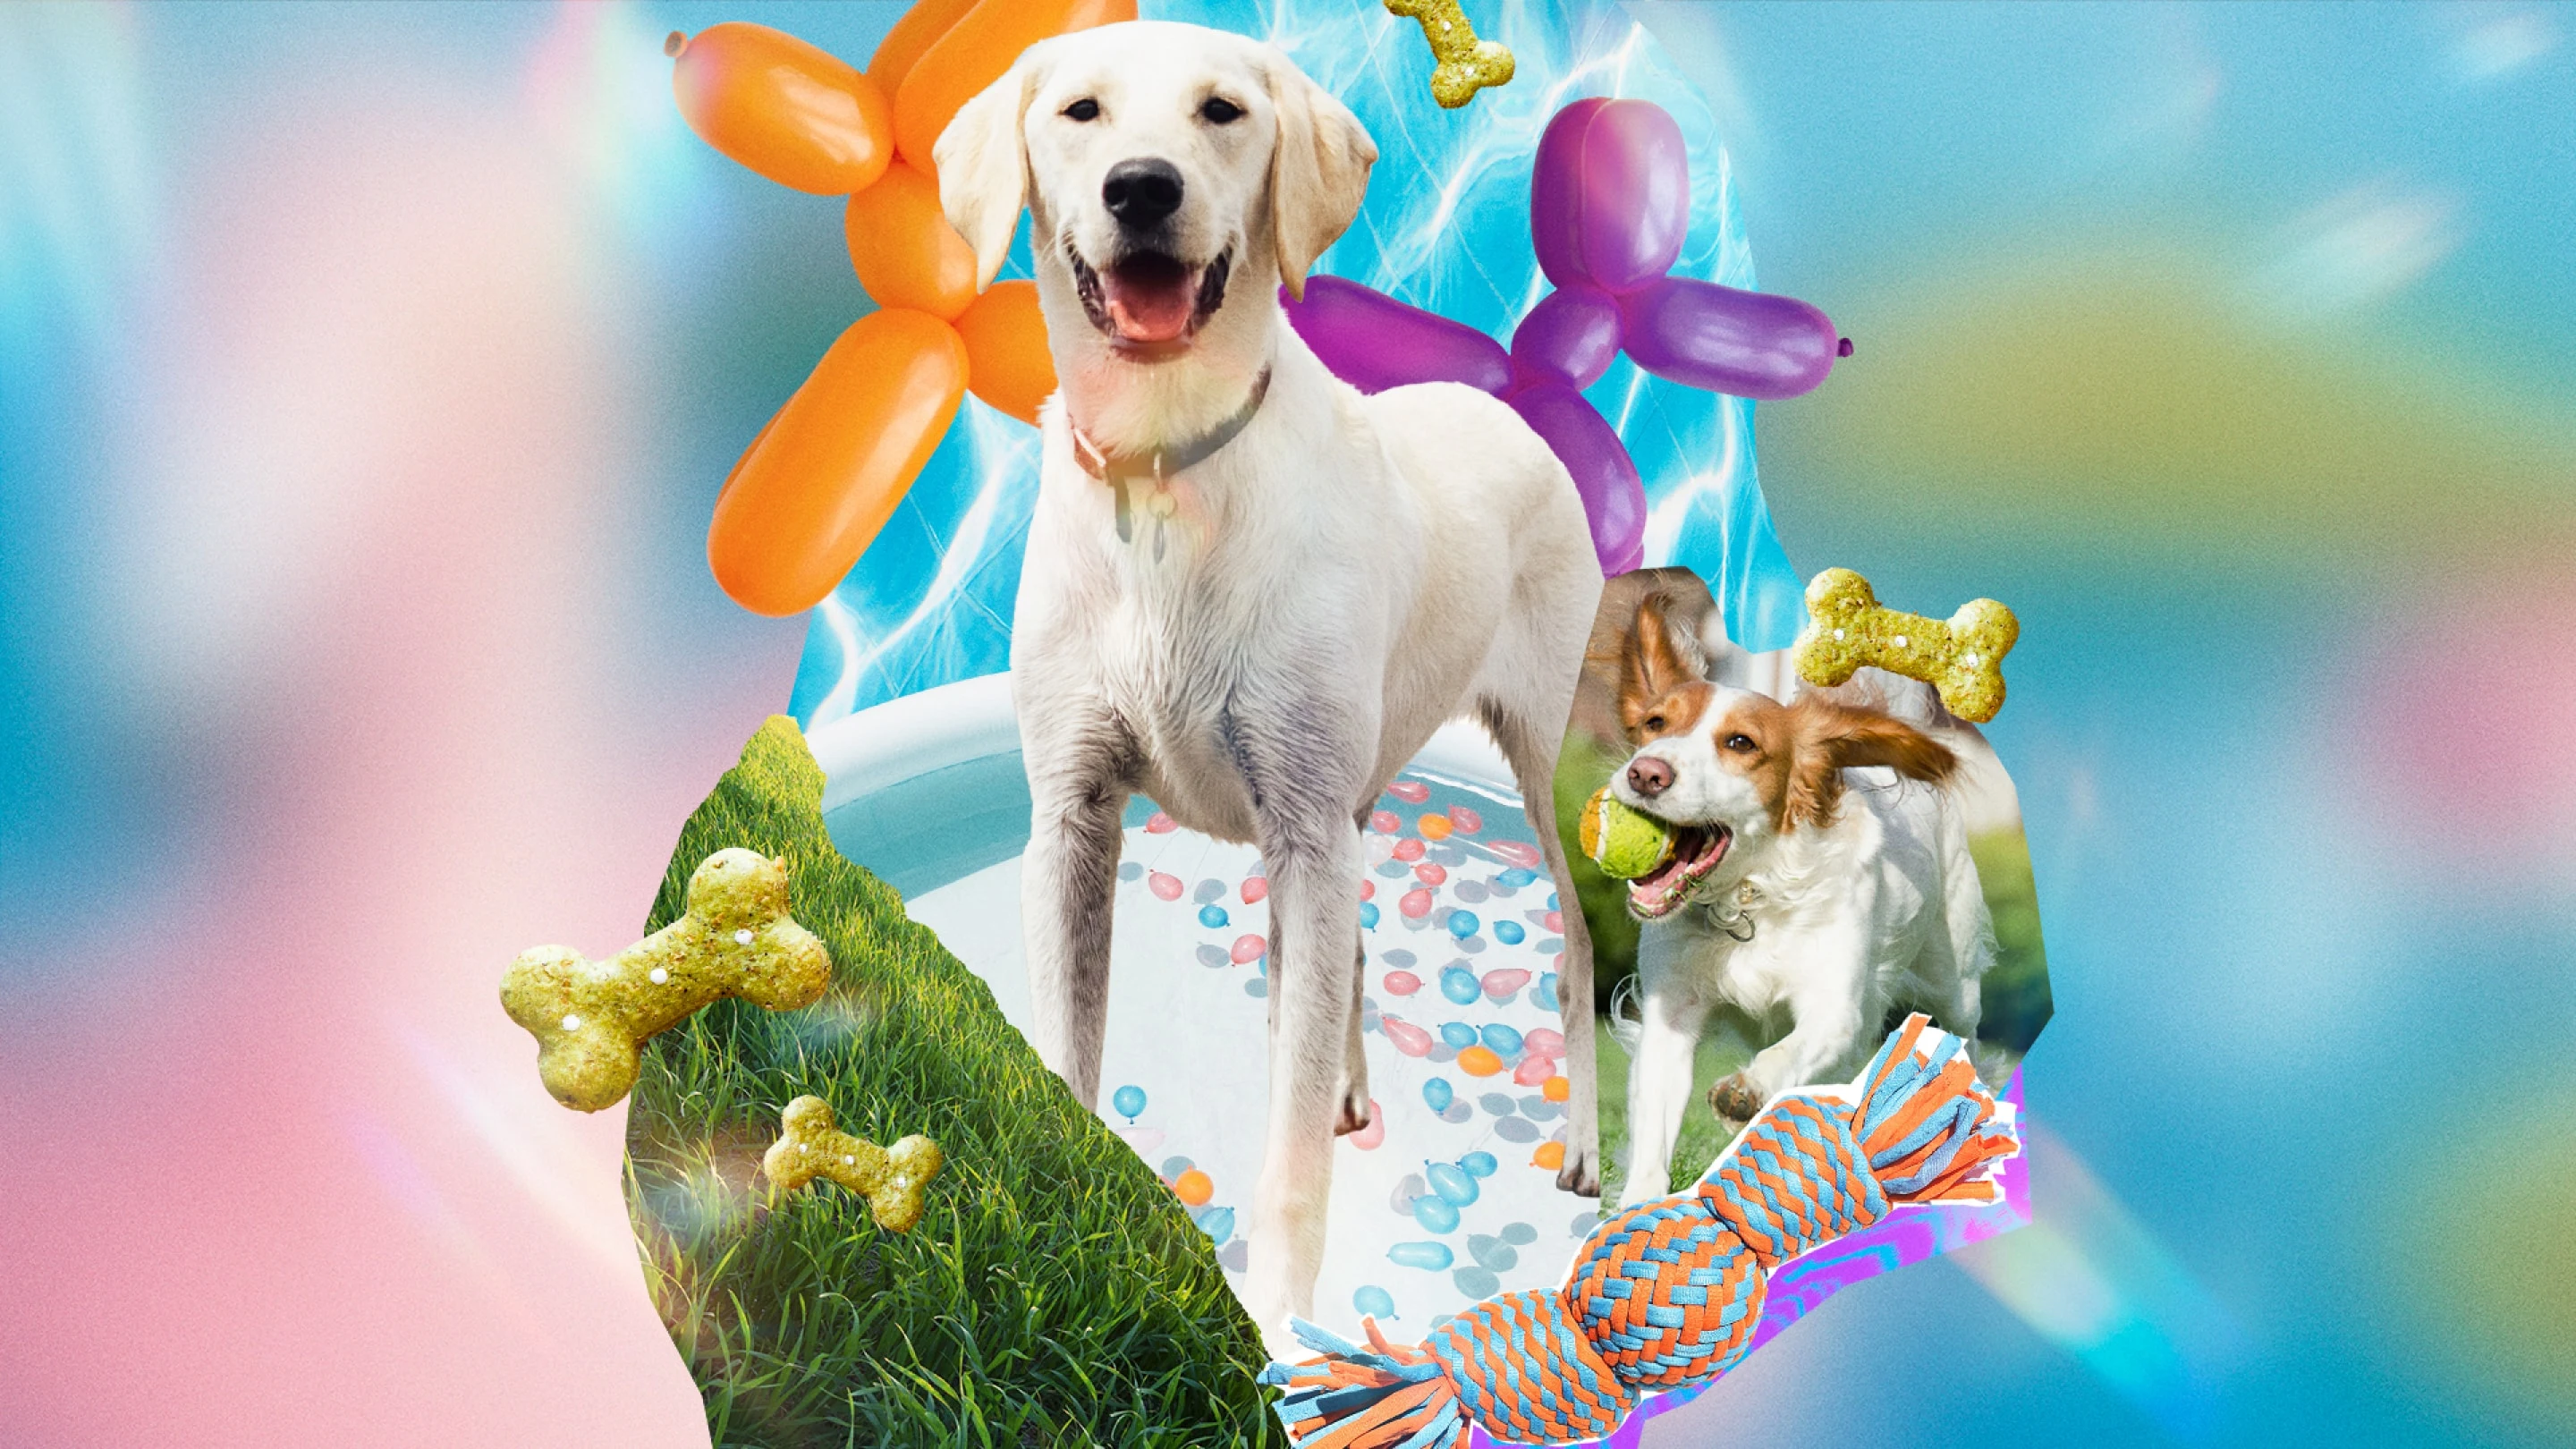 A canine-themed collage of pool-loving pups, dog treats, balloon dogs and dog toys.